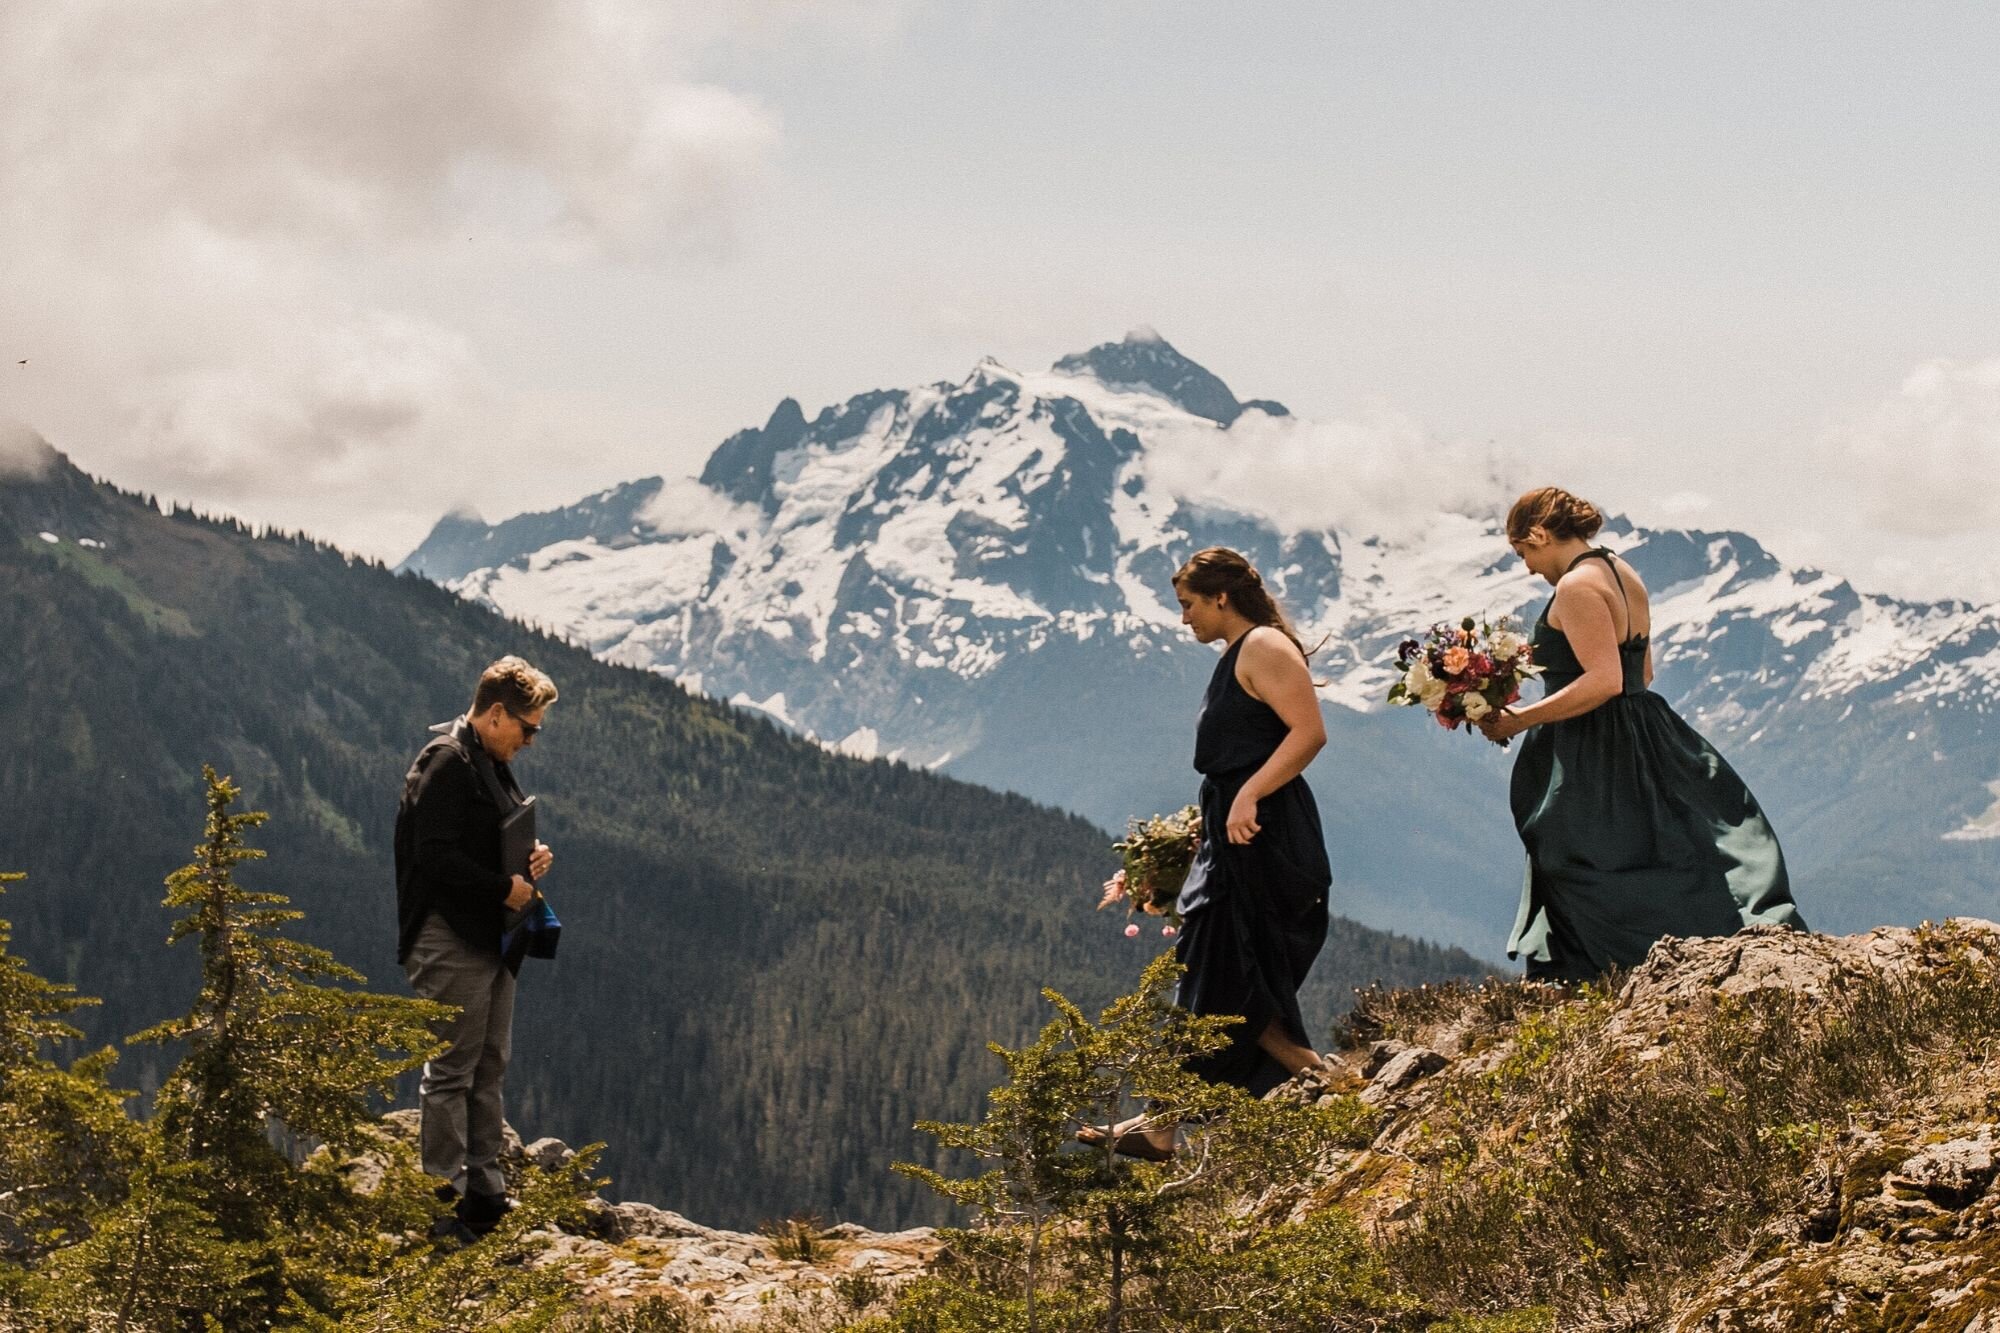 elopement with family | Between the Pine